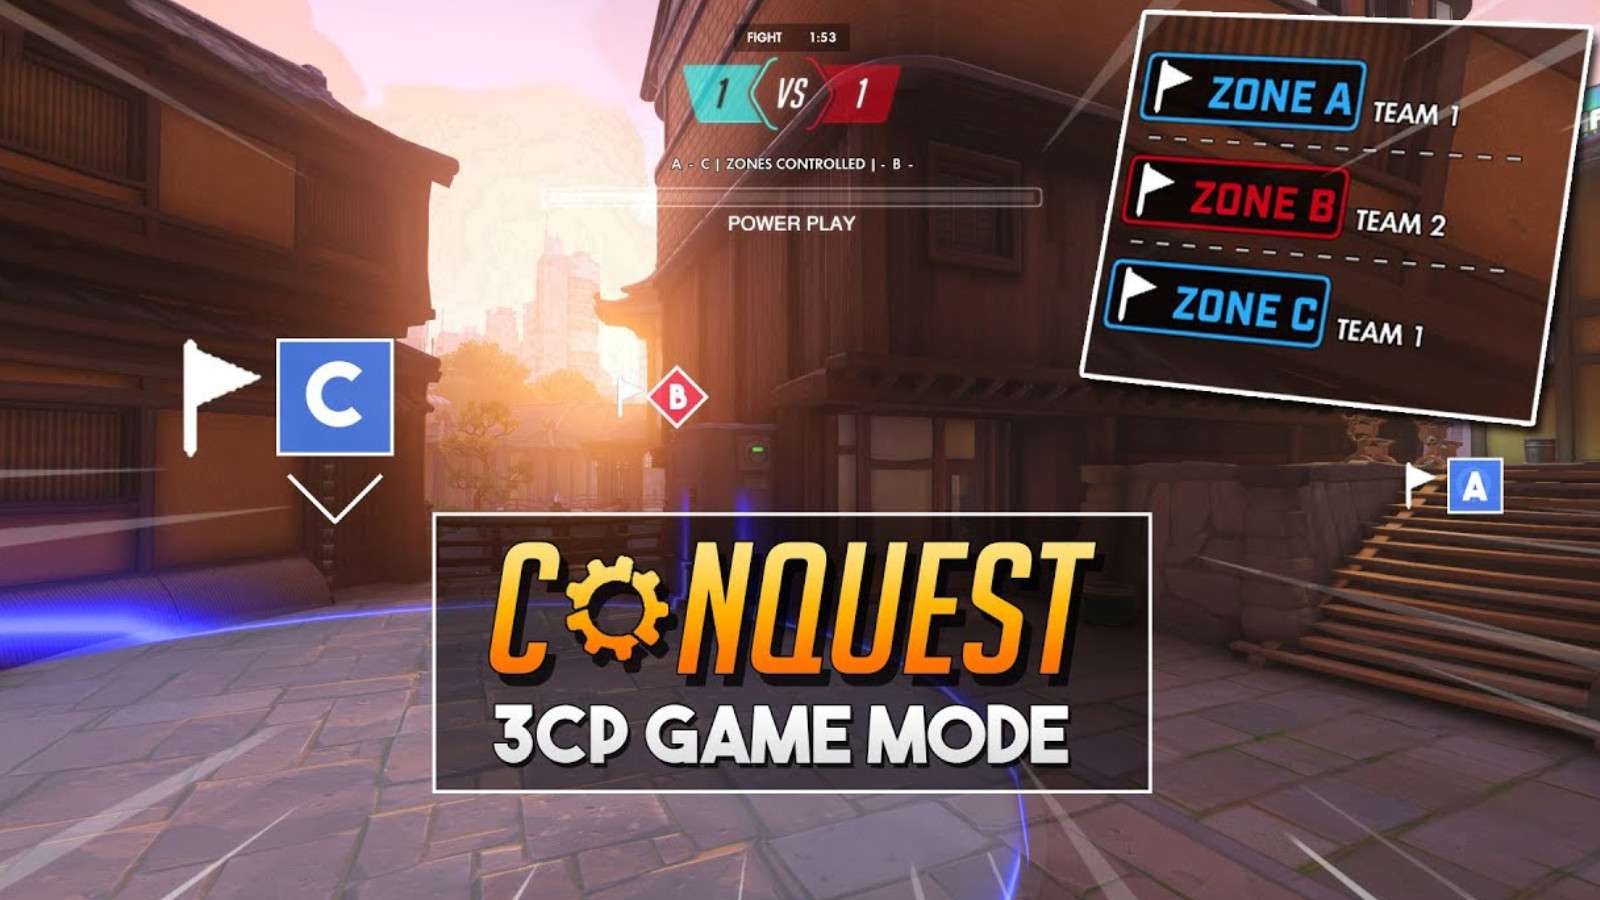 Overwatch conquest mode